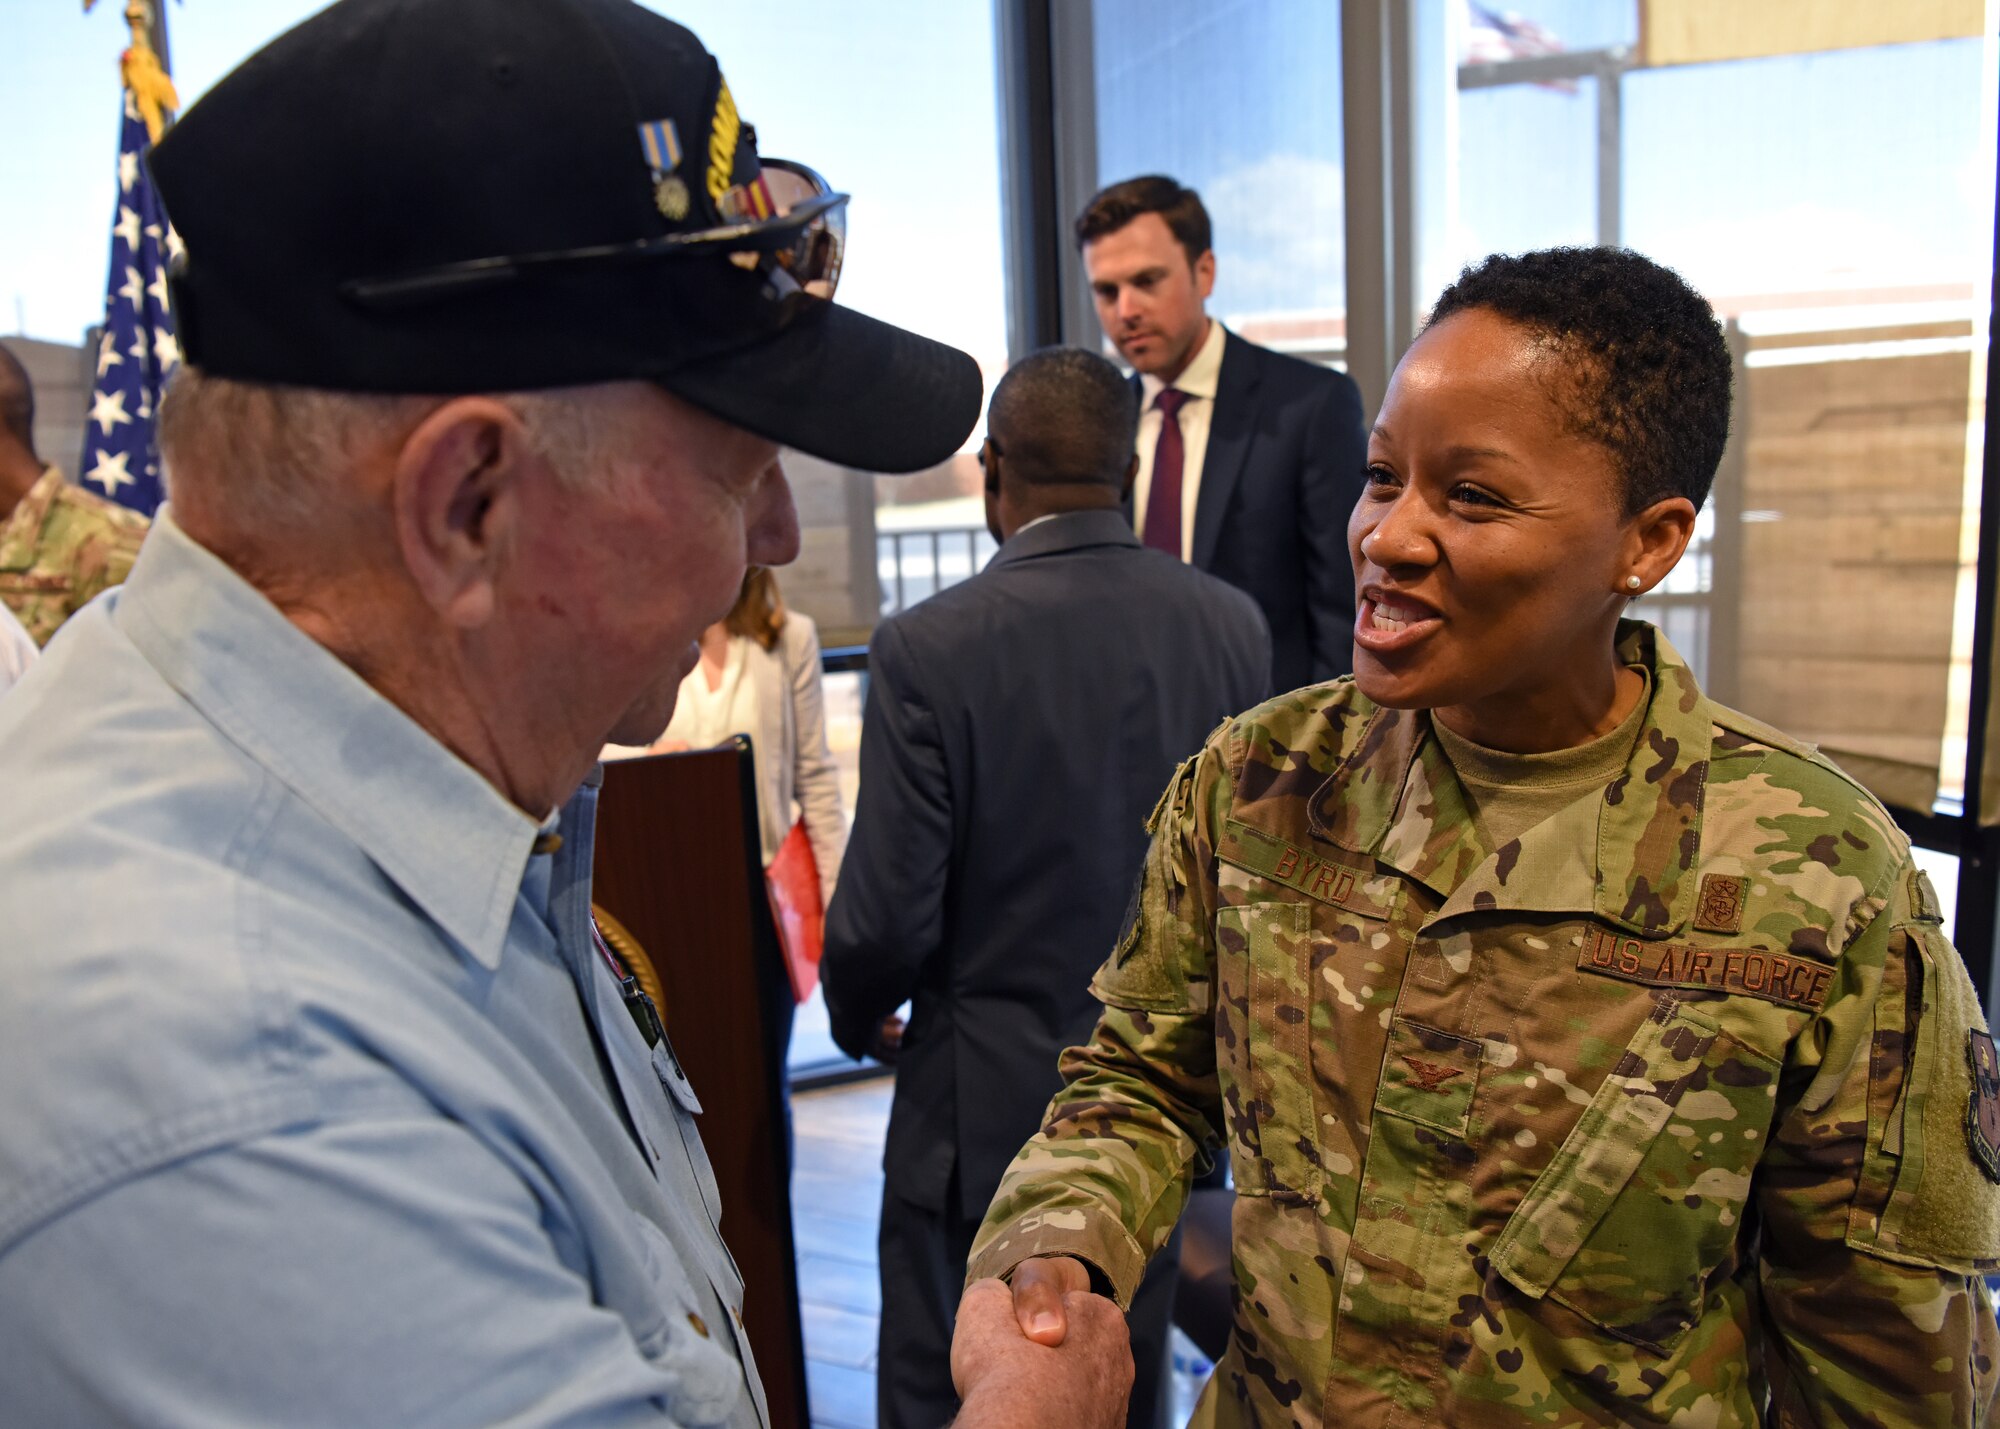 U.S. Air Force Col. Lauren Byrd, 17th Medical Group commander, shakes a veteran’s hand at the Veteran Affairs clinic ribbon cutting in San Angelo, Texas, August 20, 2019. Goodfellow Air Force Base leadership attended the ribbon cutting to show their support and gratitude. (U.S. Air Force photo by Airman 1st Class Ethan Sherwood/Released)